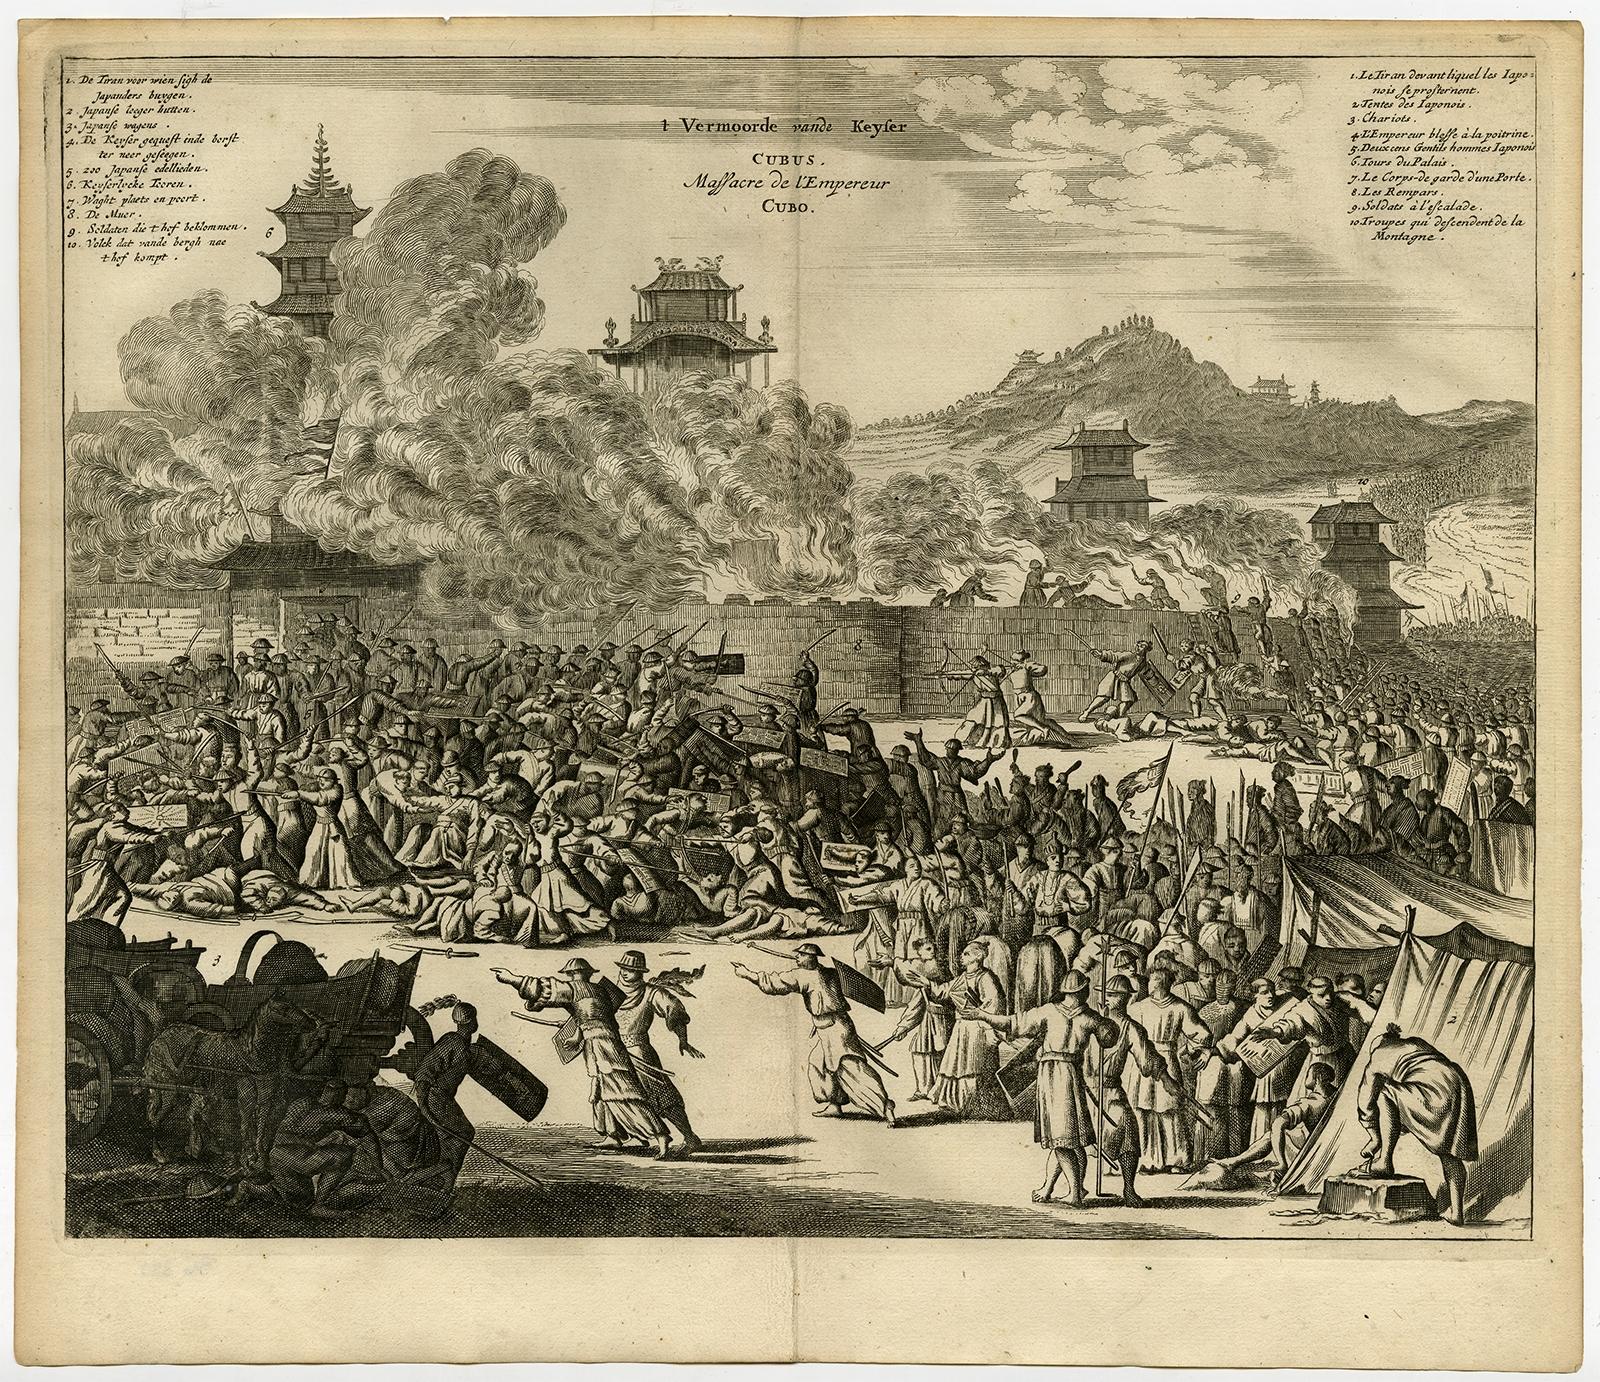 Antique print, titled: ''t Vermoorde vande Keyser Cubus. 

Massacre de l'Empereur Cubo.' - ('Murder of the Emperor Cubo'). Two armies clash in Kyoto, where the reigning Emperor was murdered. Arnoldus Montanus' 